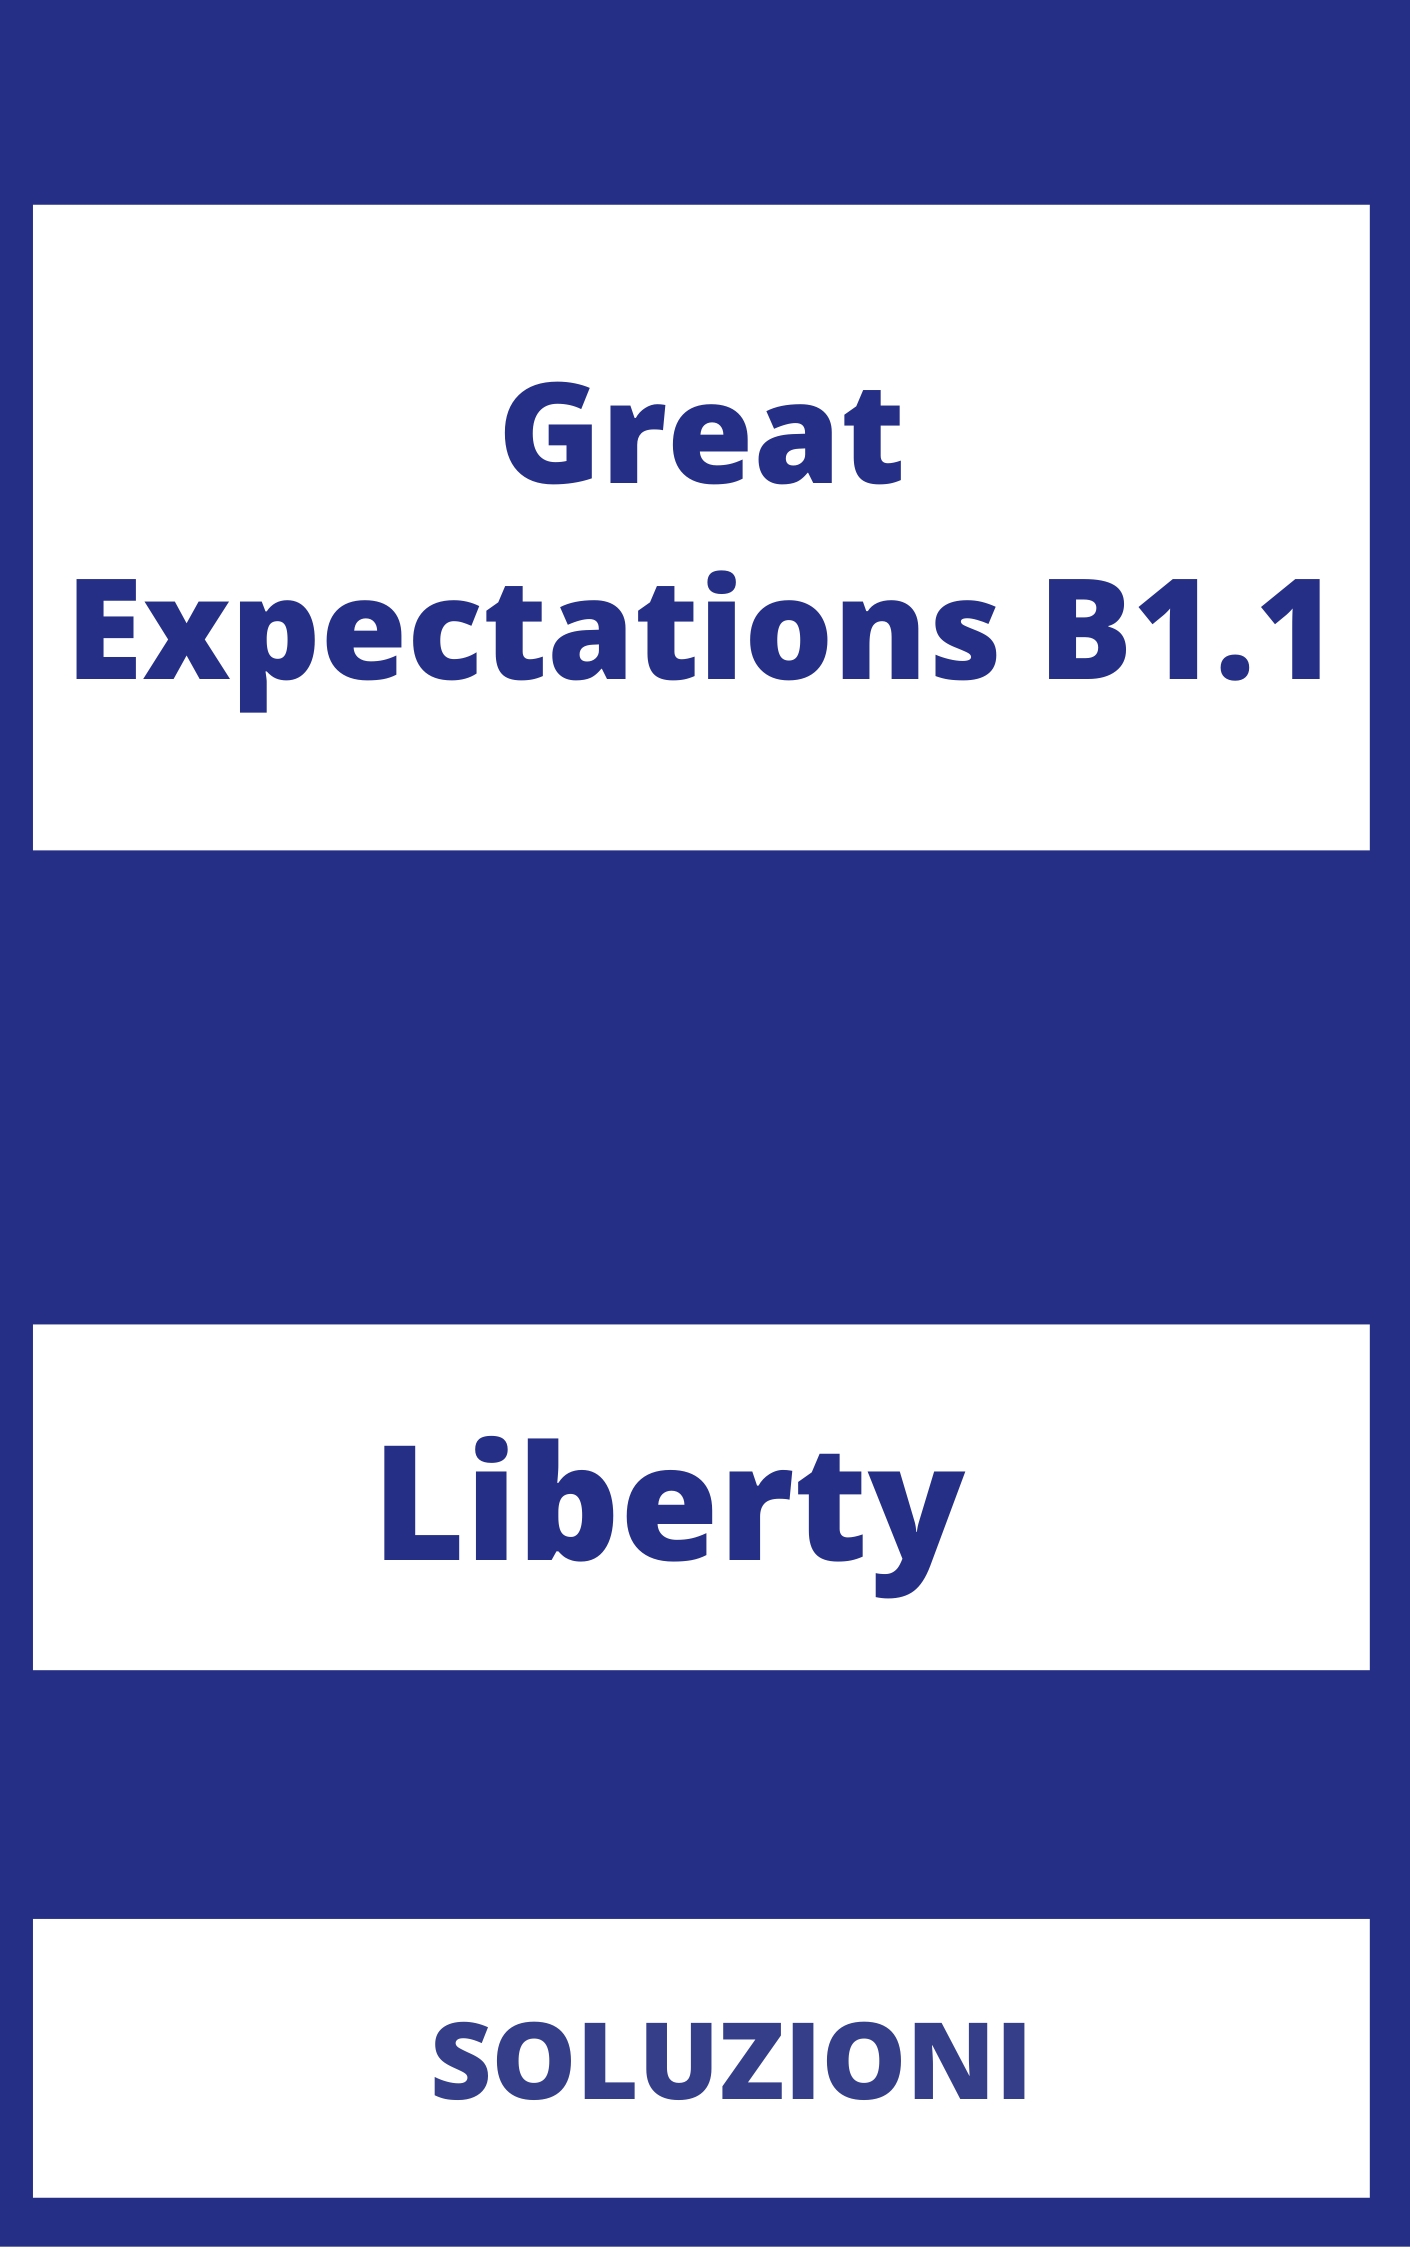 Great Expectations B1.1 Soluzioni